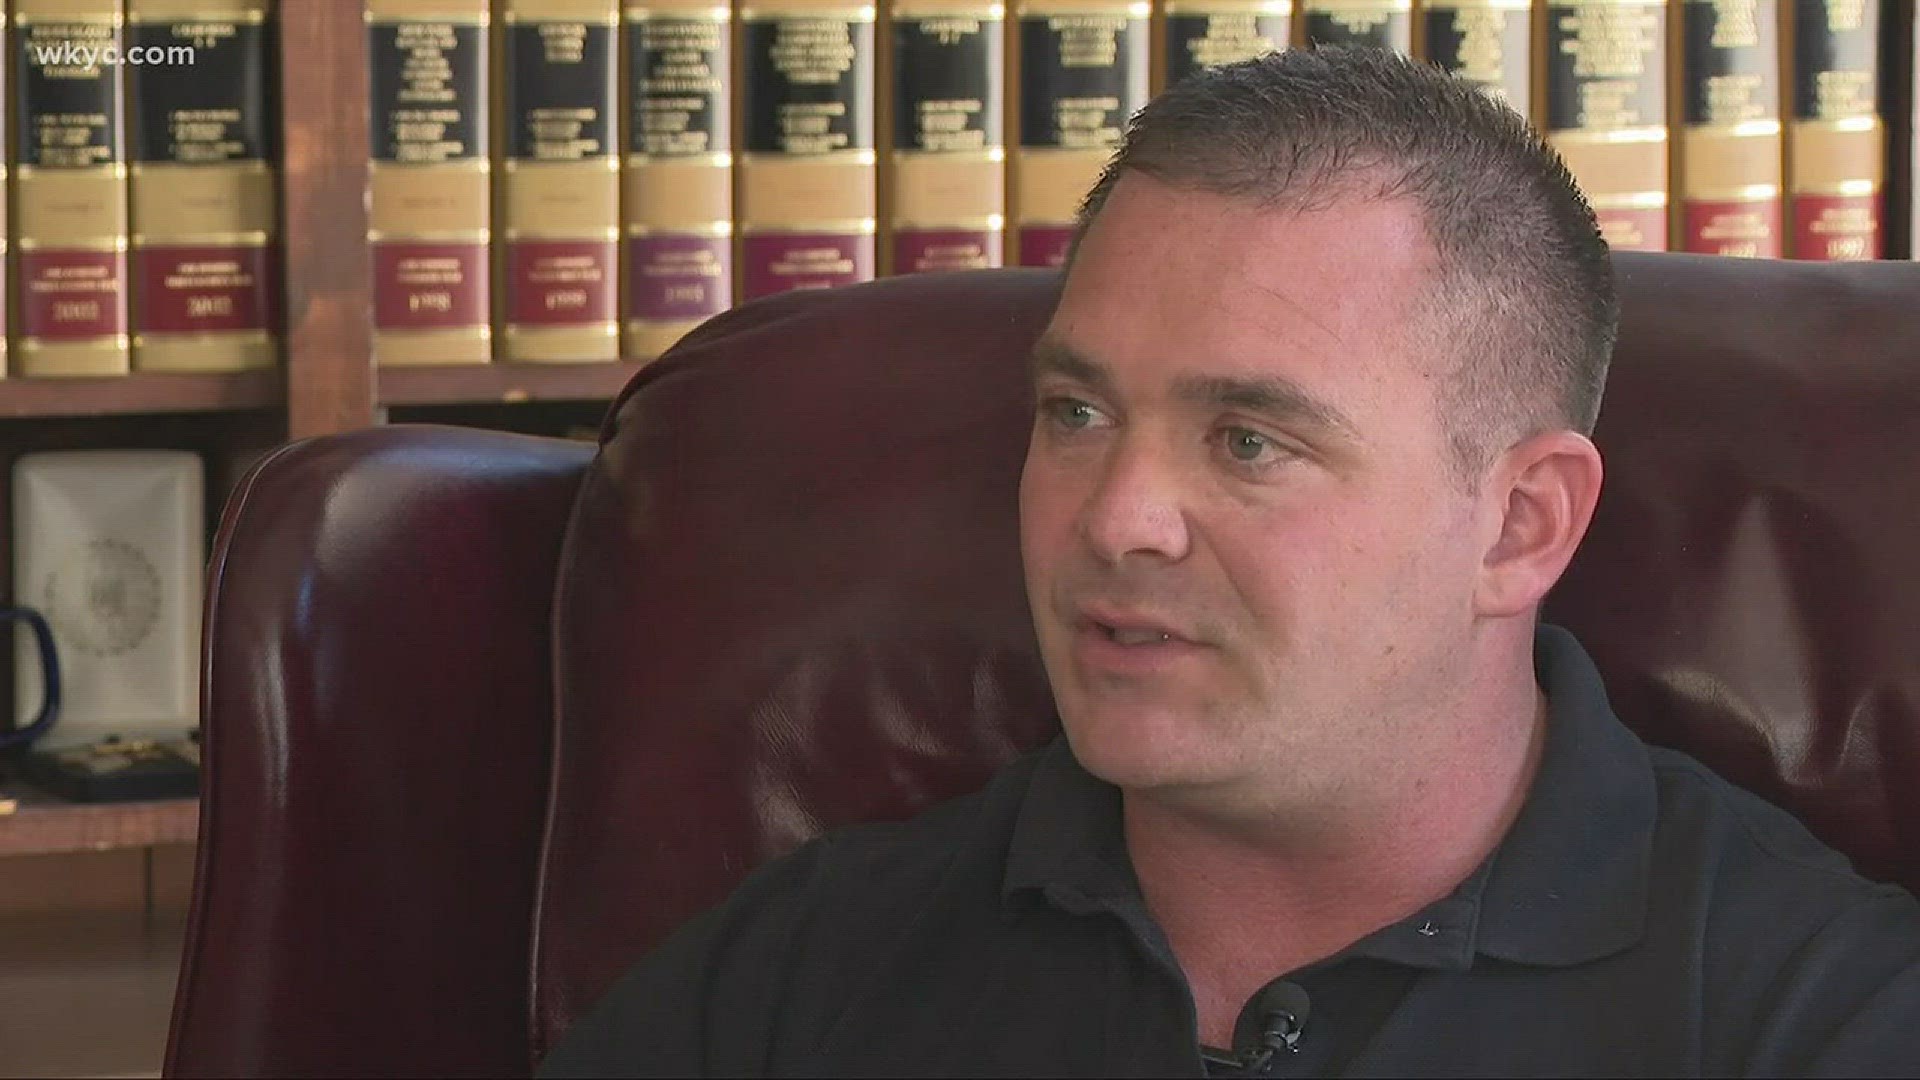 Cleveland officer to file lawsuit after being suspended